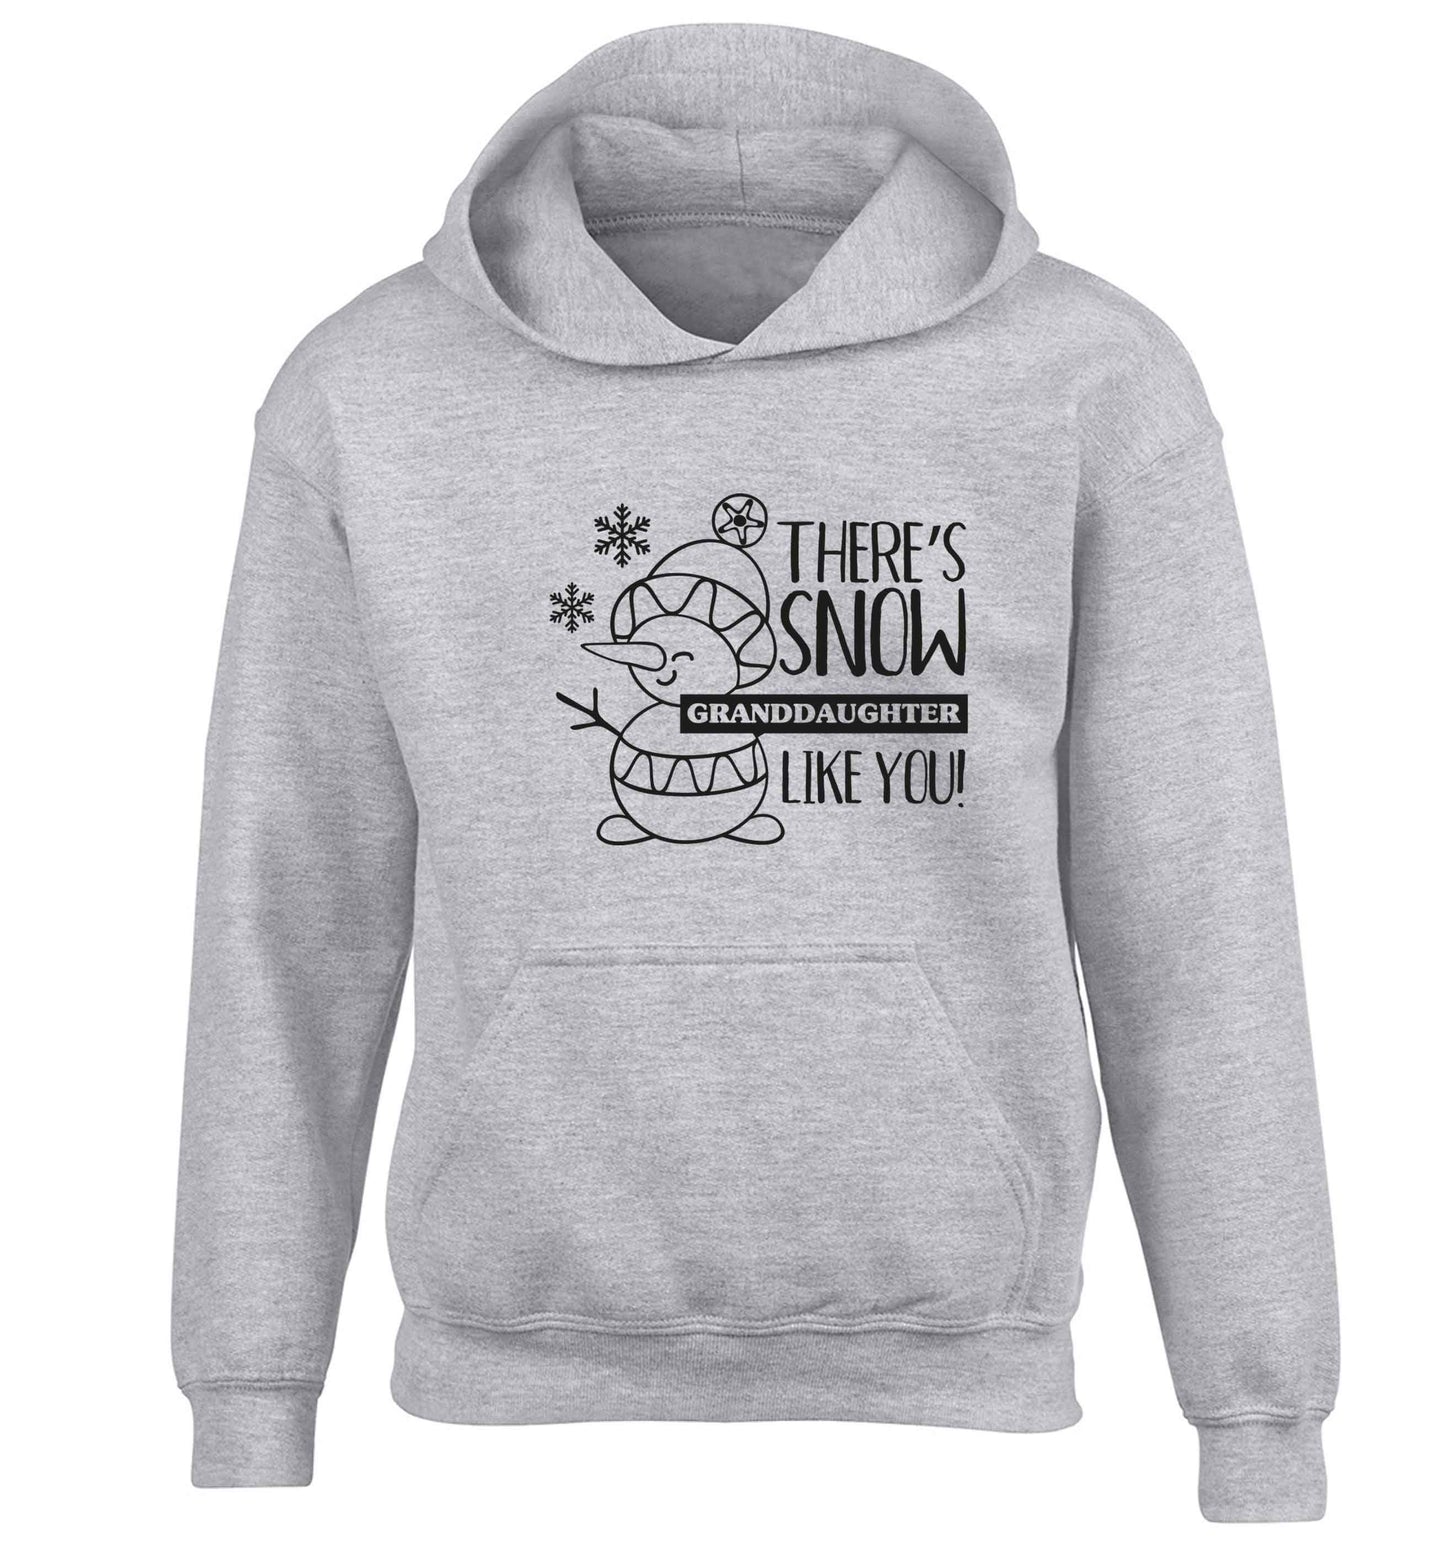 There's snow granddaughter like you children's grey hoodie 12-13 Years